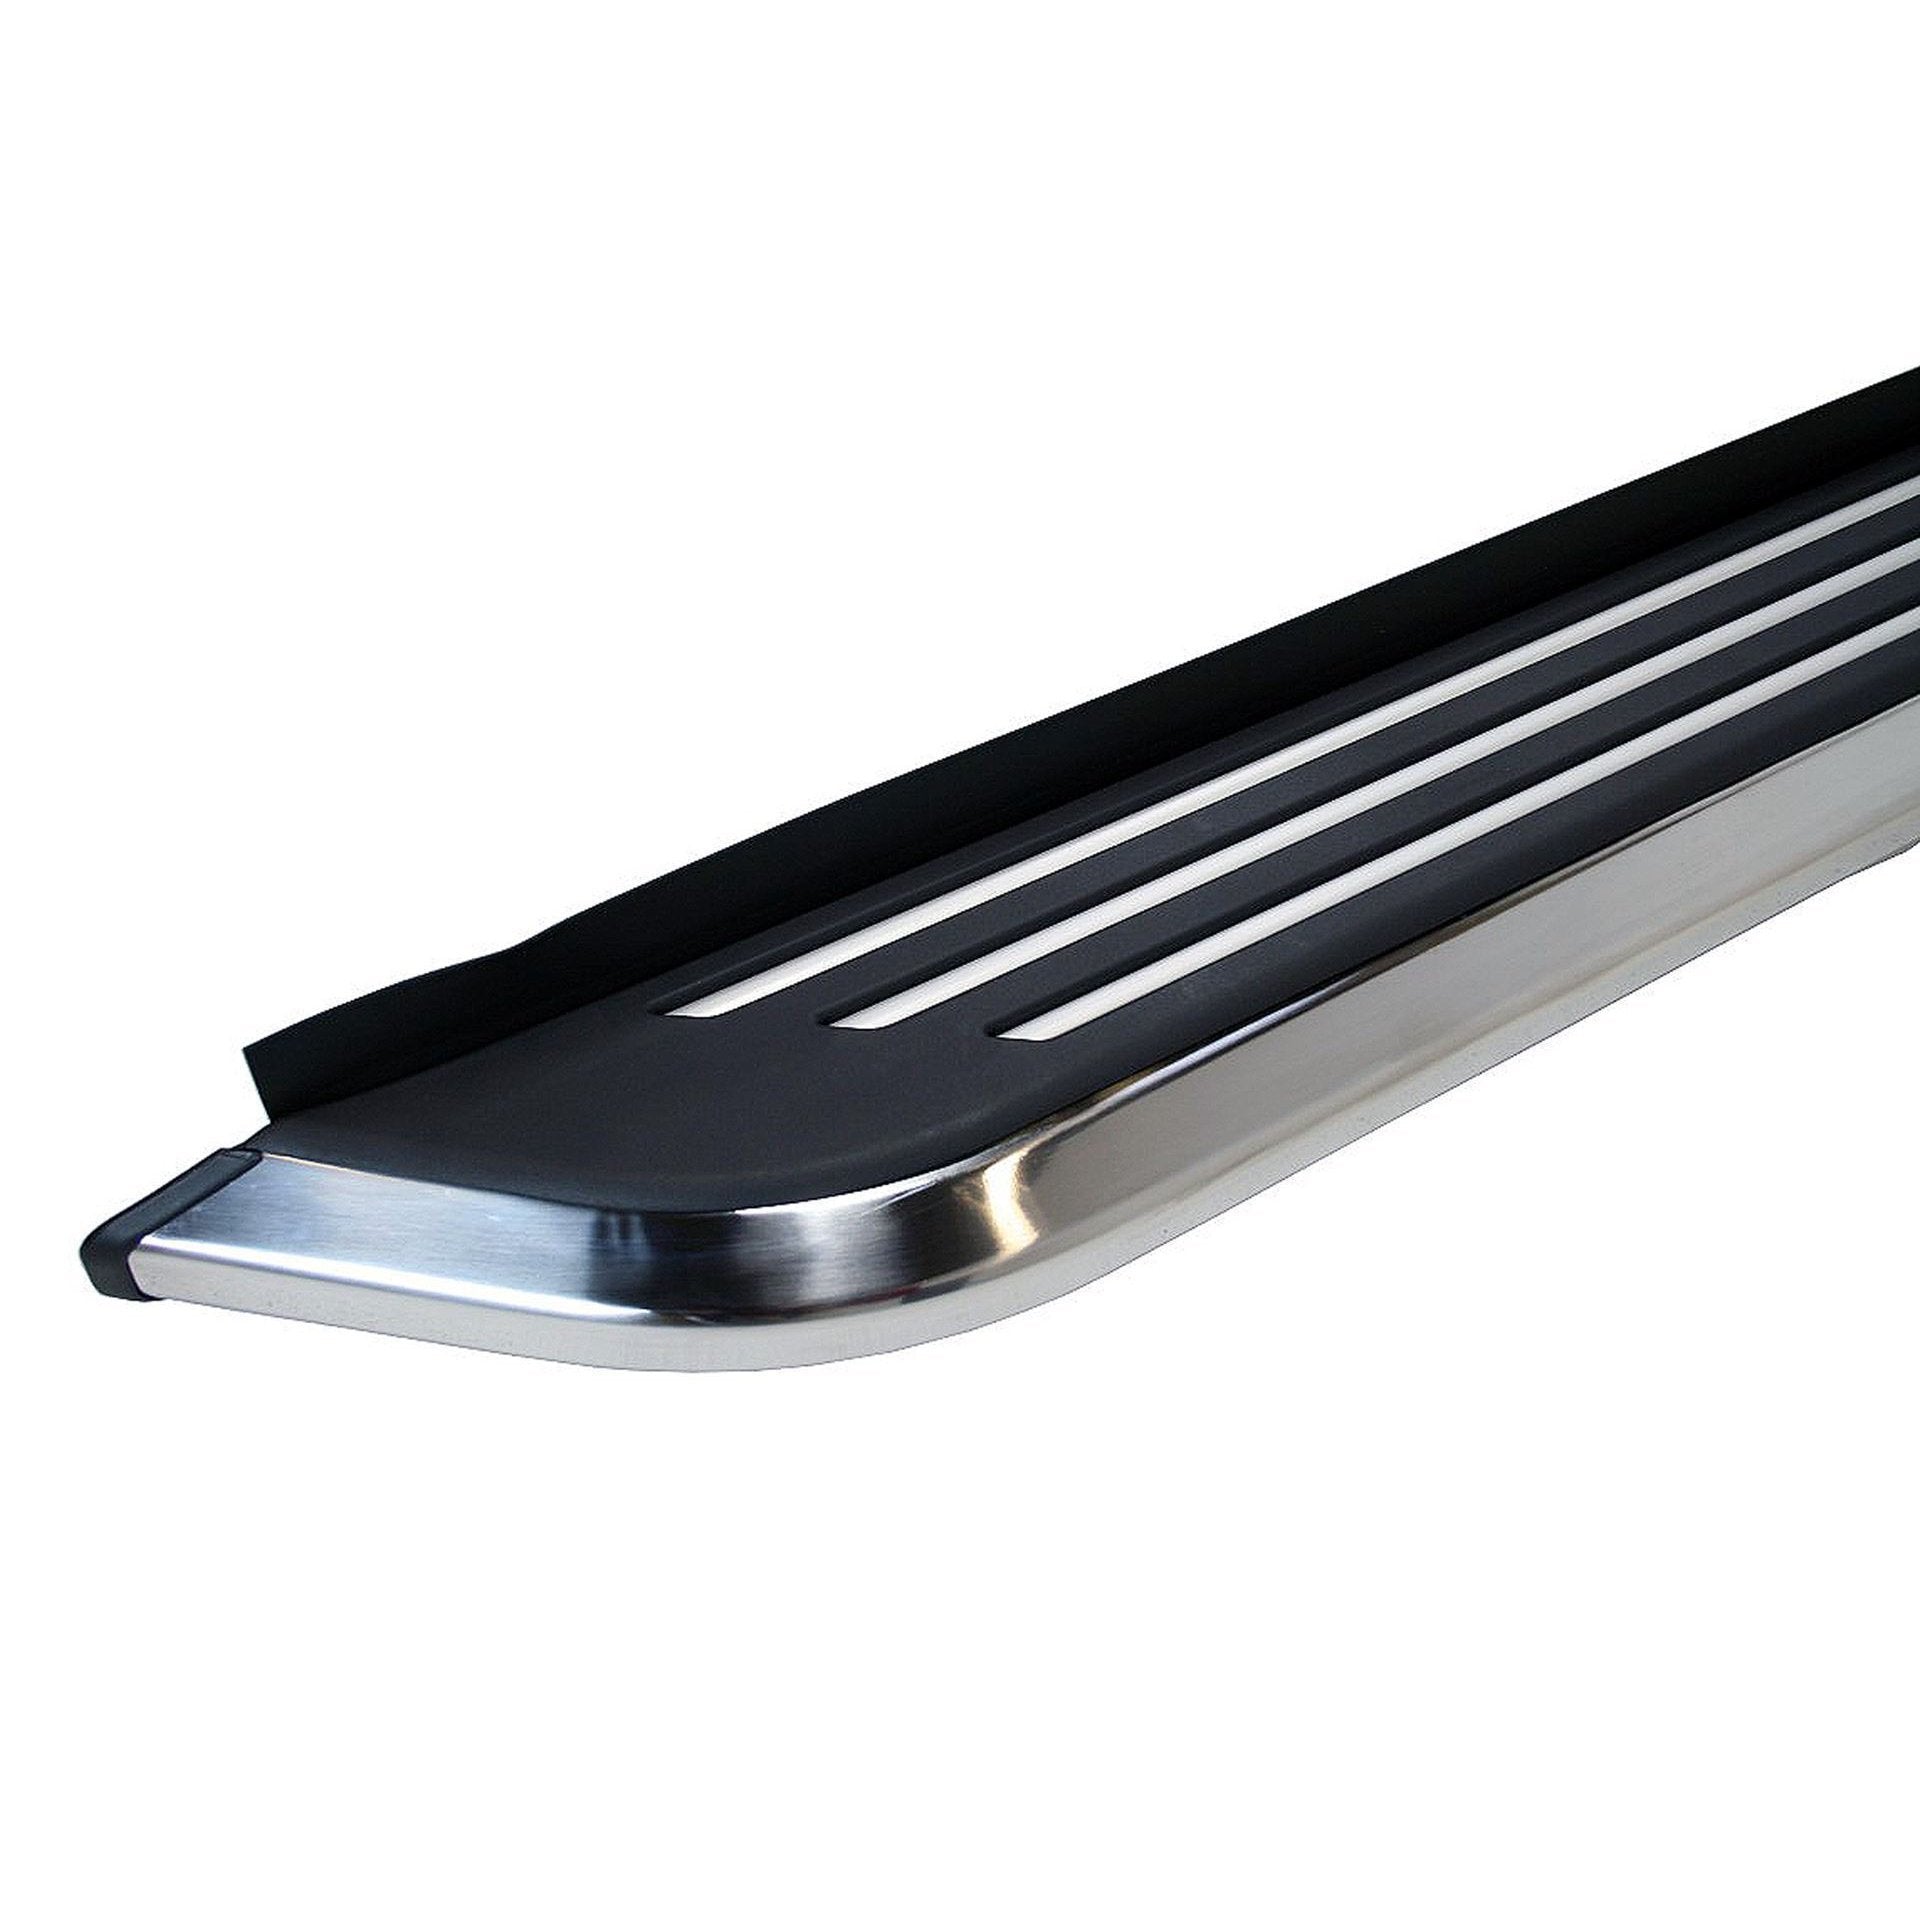 Premier Side Steps Running Boards for Vauxhall Opel Vivaro SWB 2014-2018 -  - sold by Direct4x4